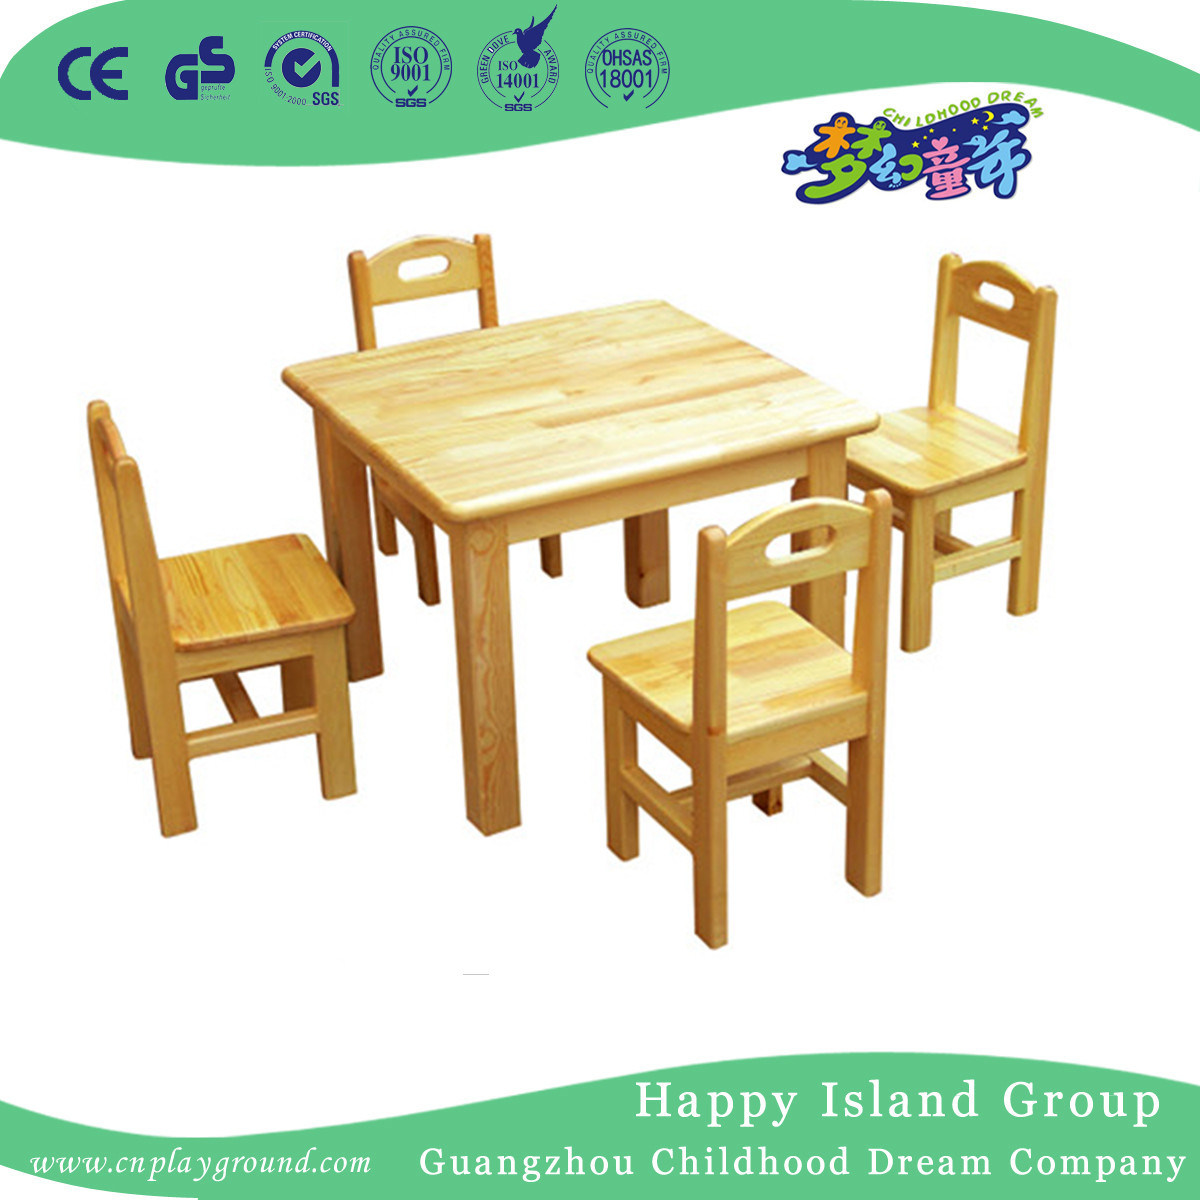 School Rustic Wooden Square Table for Children (HG-3805)